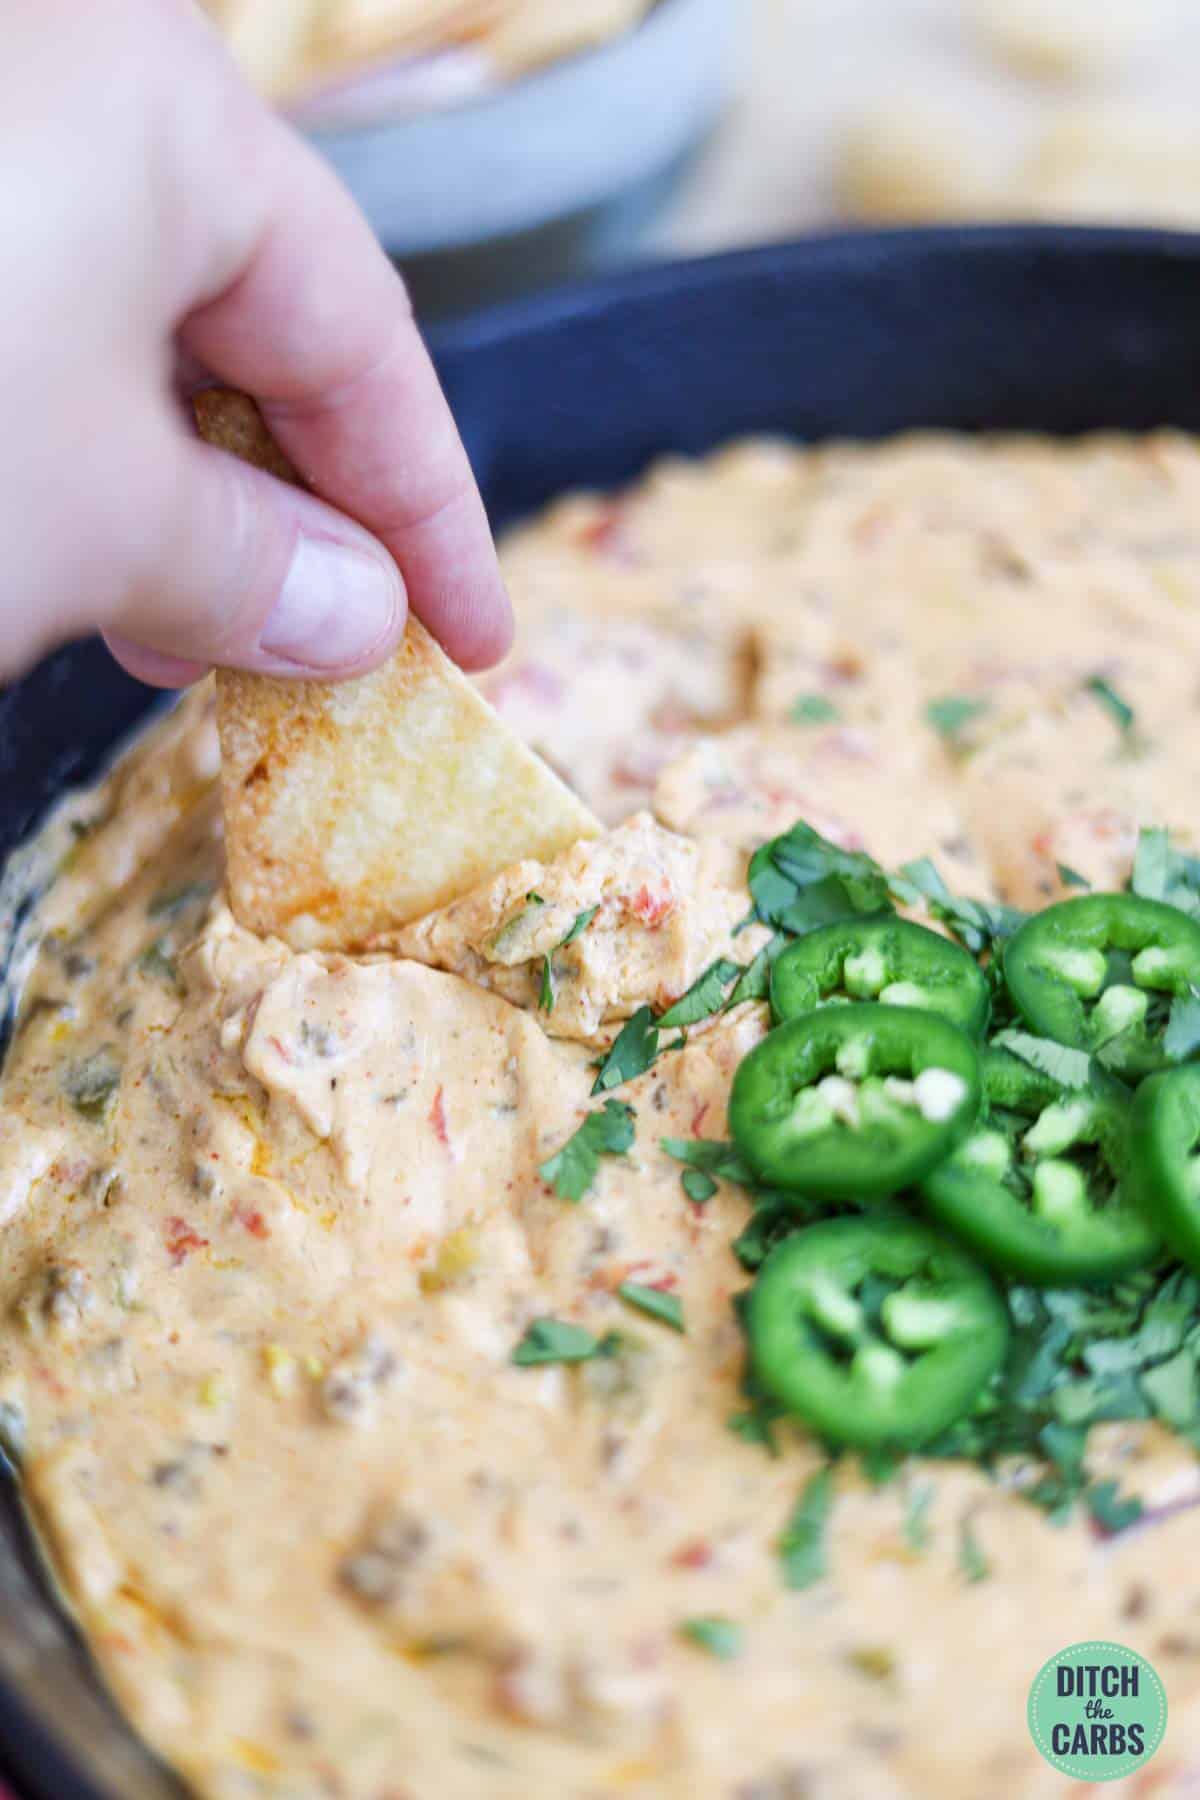 A hand kipping a keto tortilla chip into a skillet full of meaty keto queso dip.